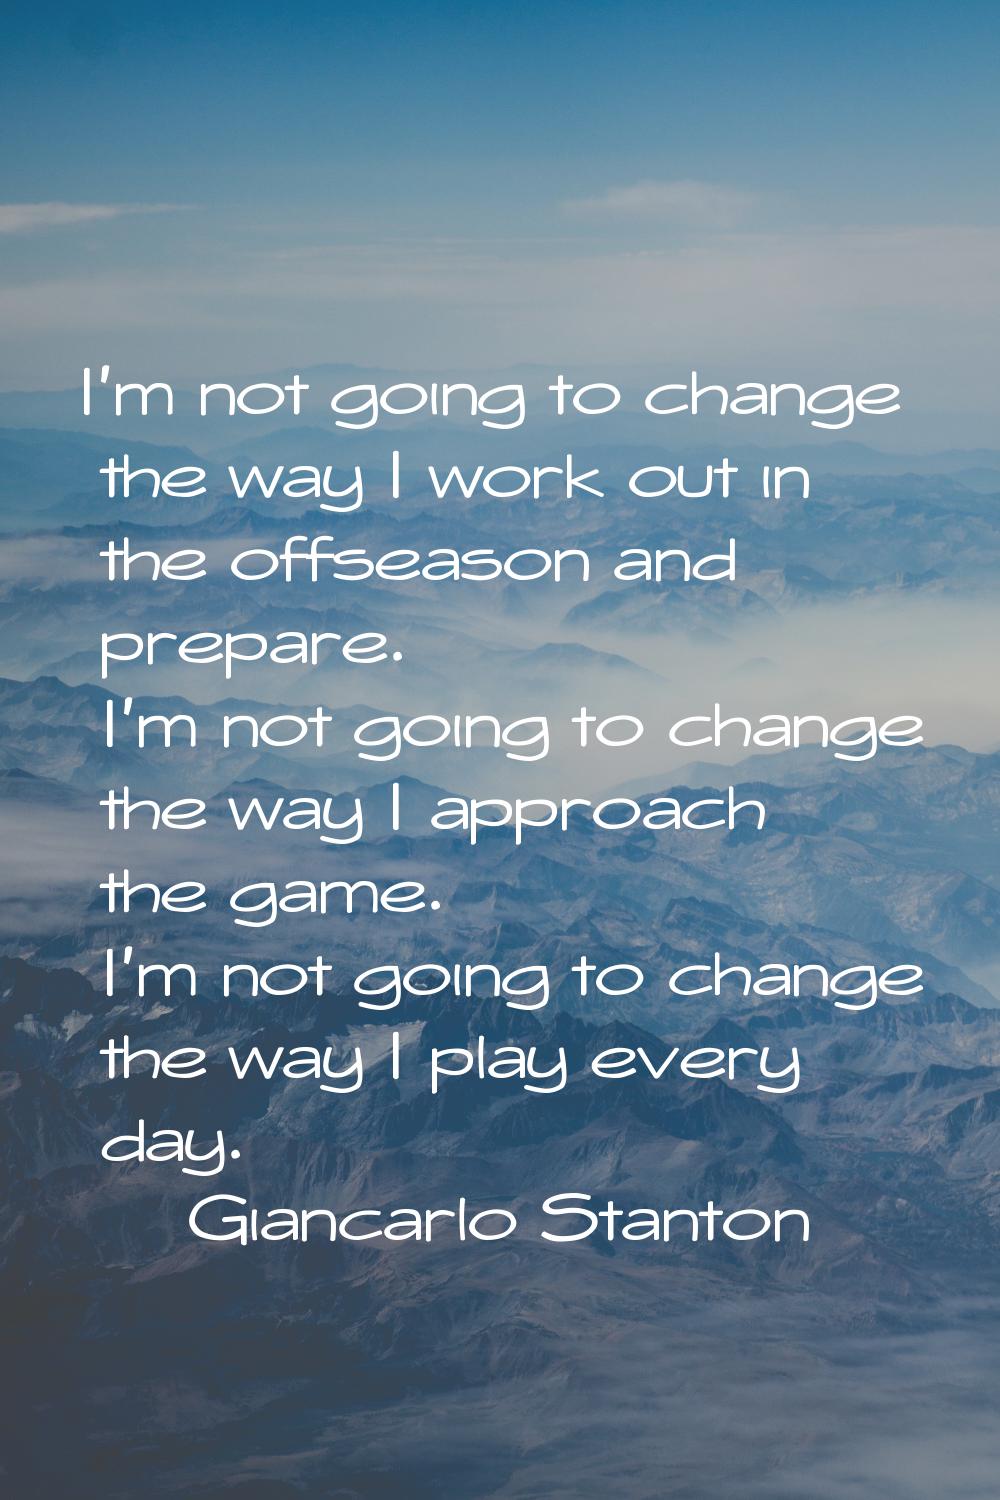 I'm not going to change the way I work out in the offseason and prepare. I'm not going to change th